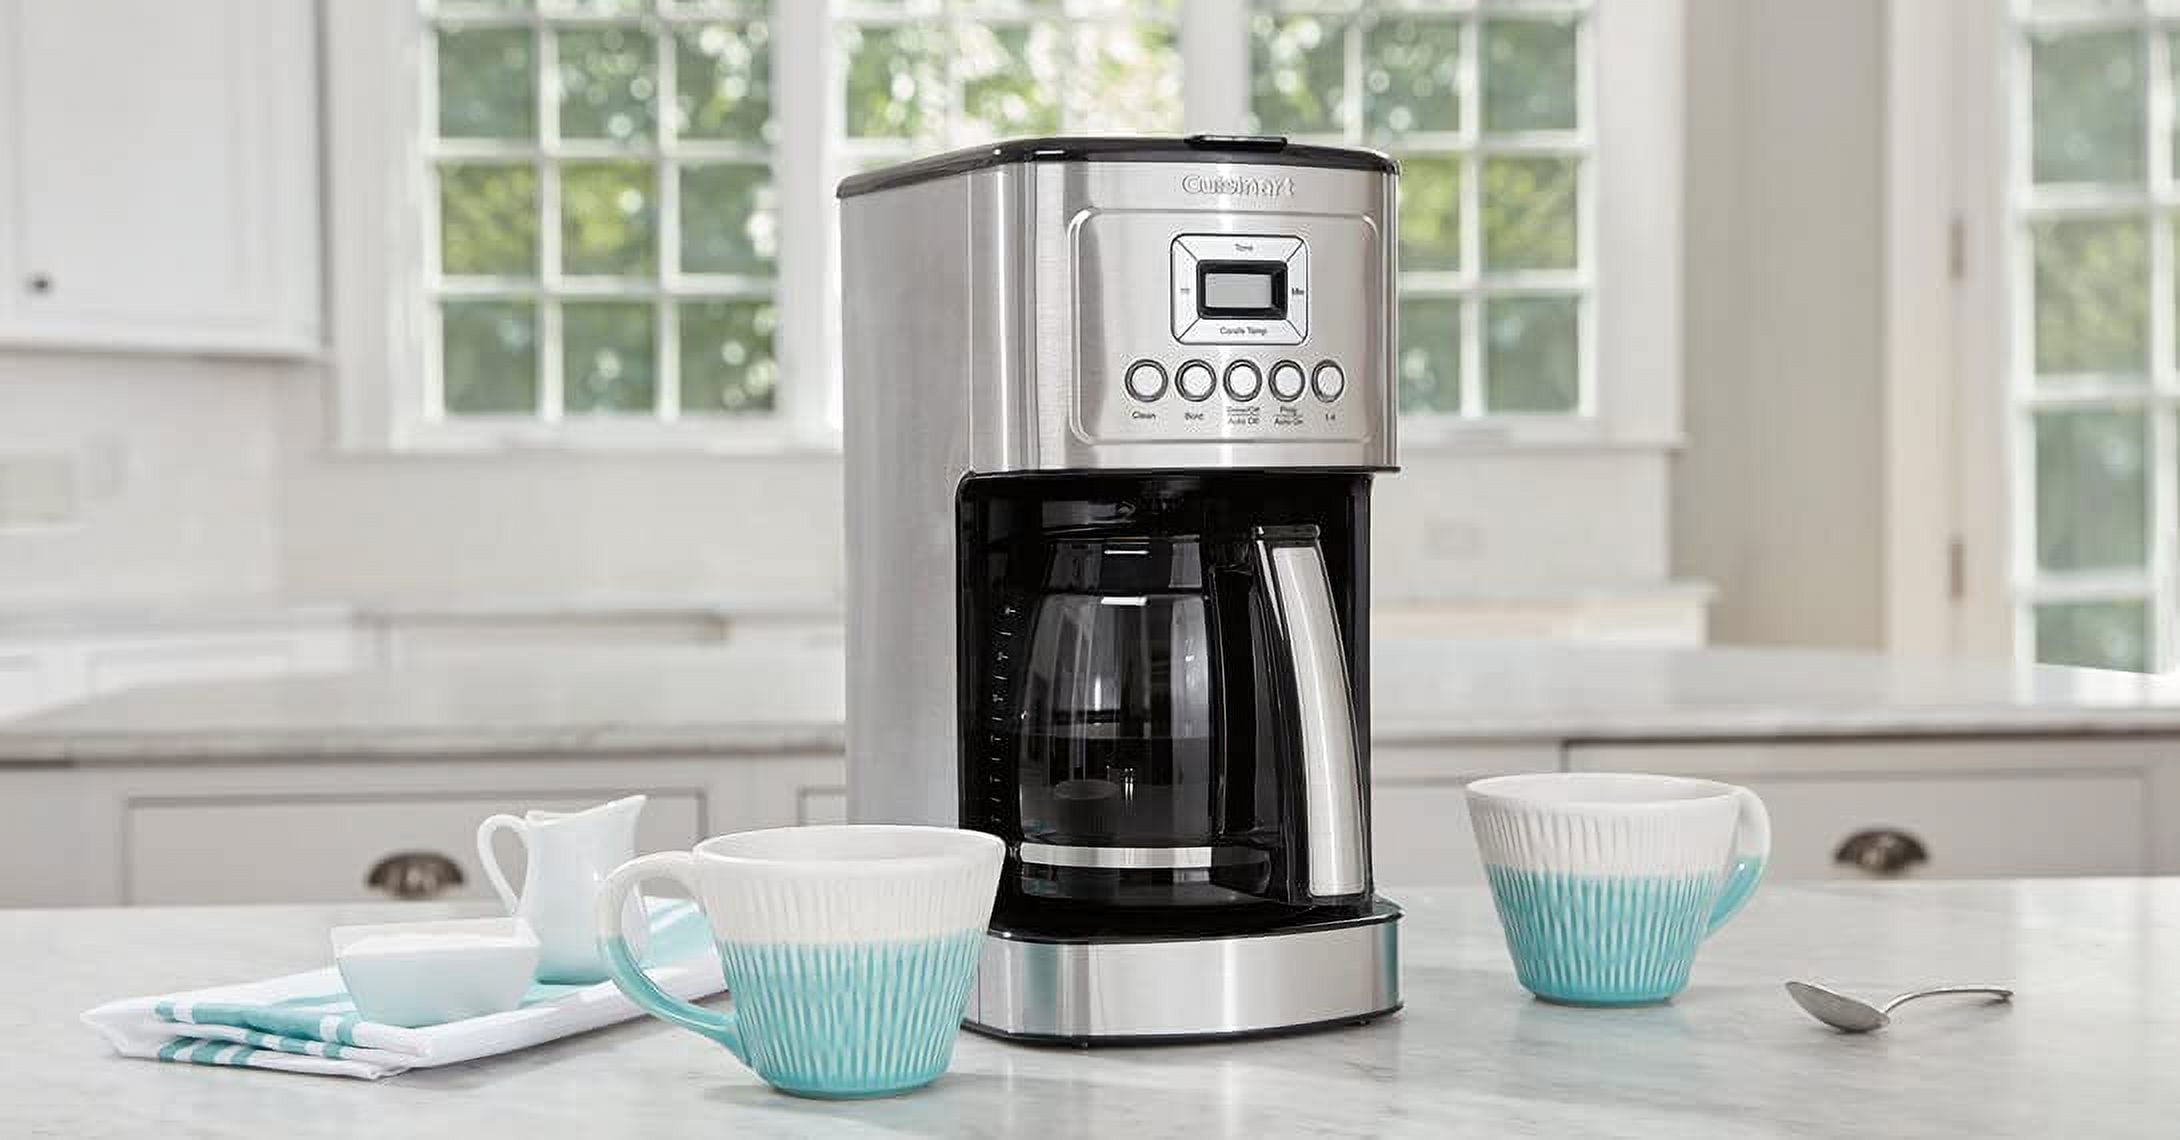 Cuisinart PerfecTemp Stainless Steel 14-Cup Programmable Coffee Maker  Machine + Reviews